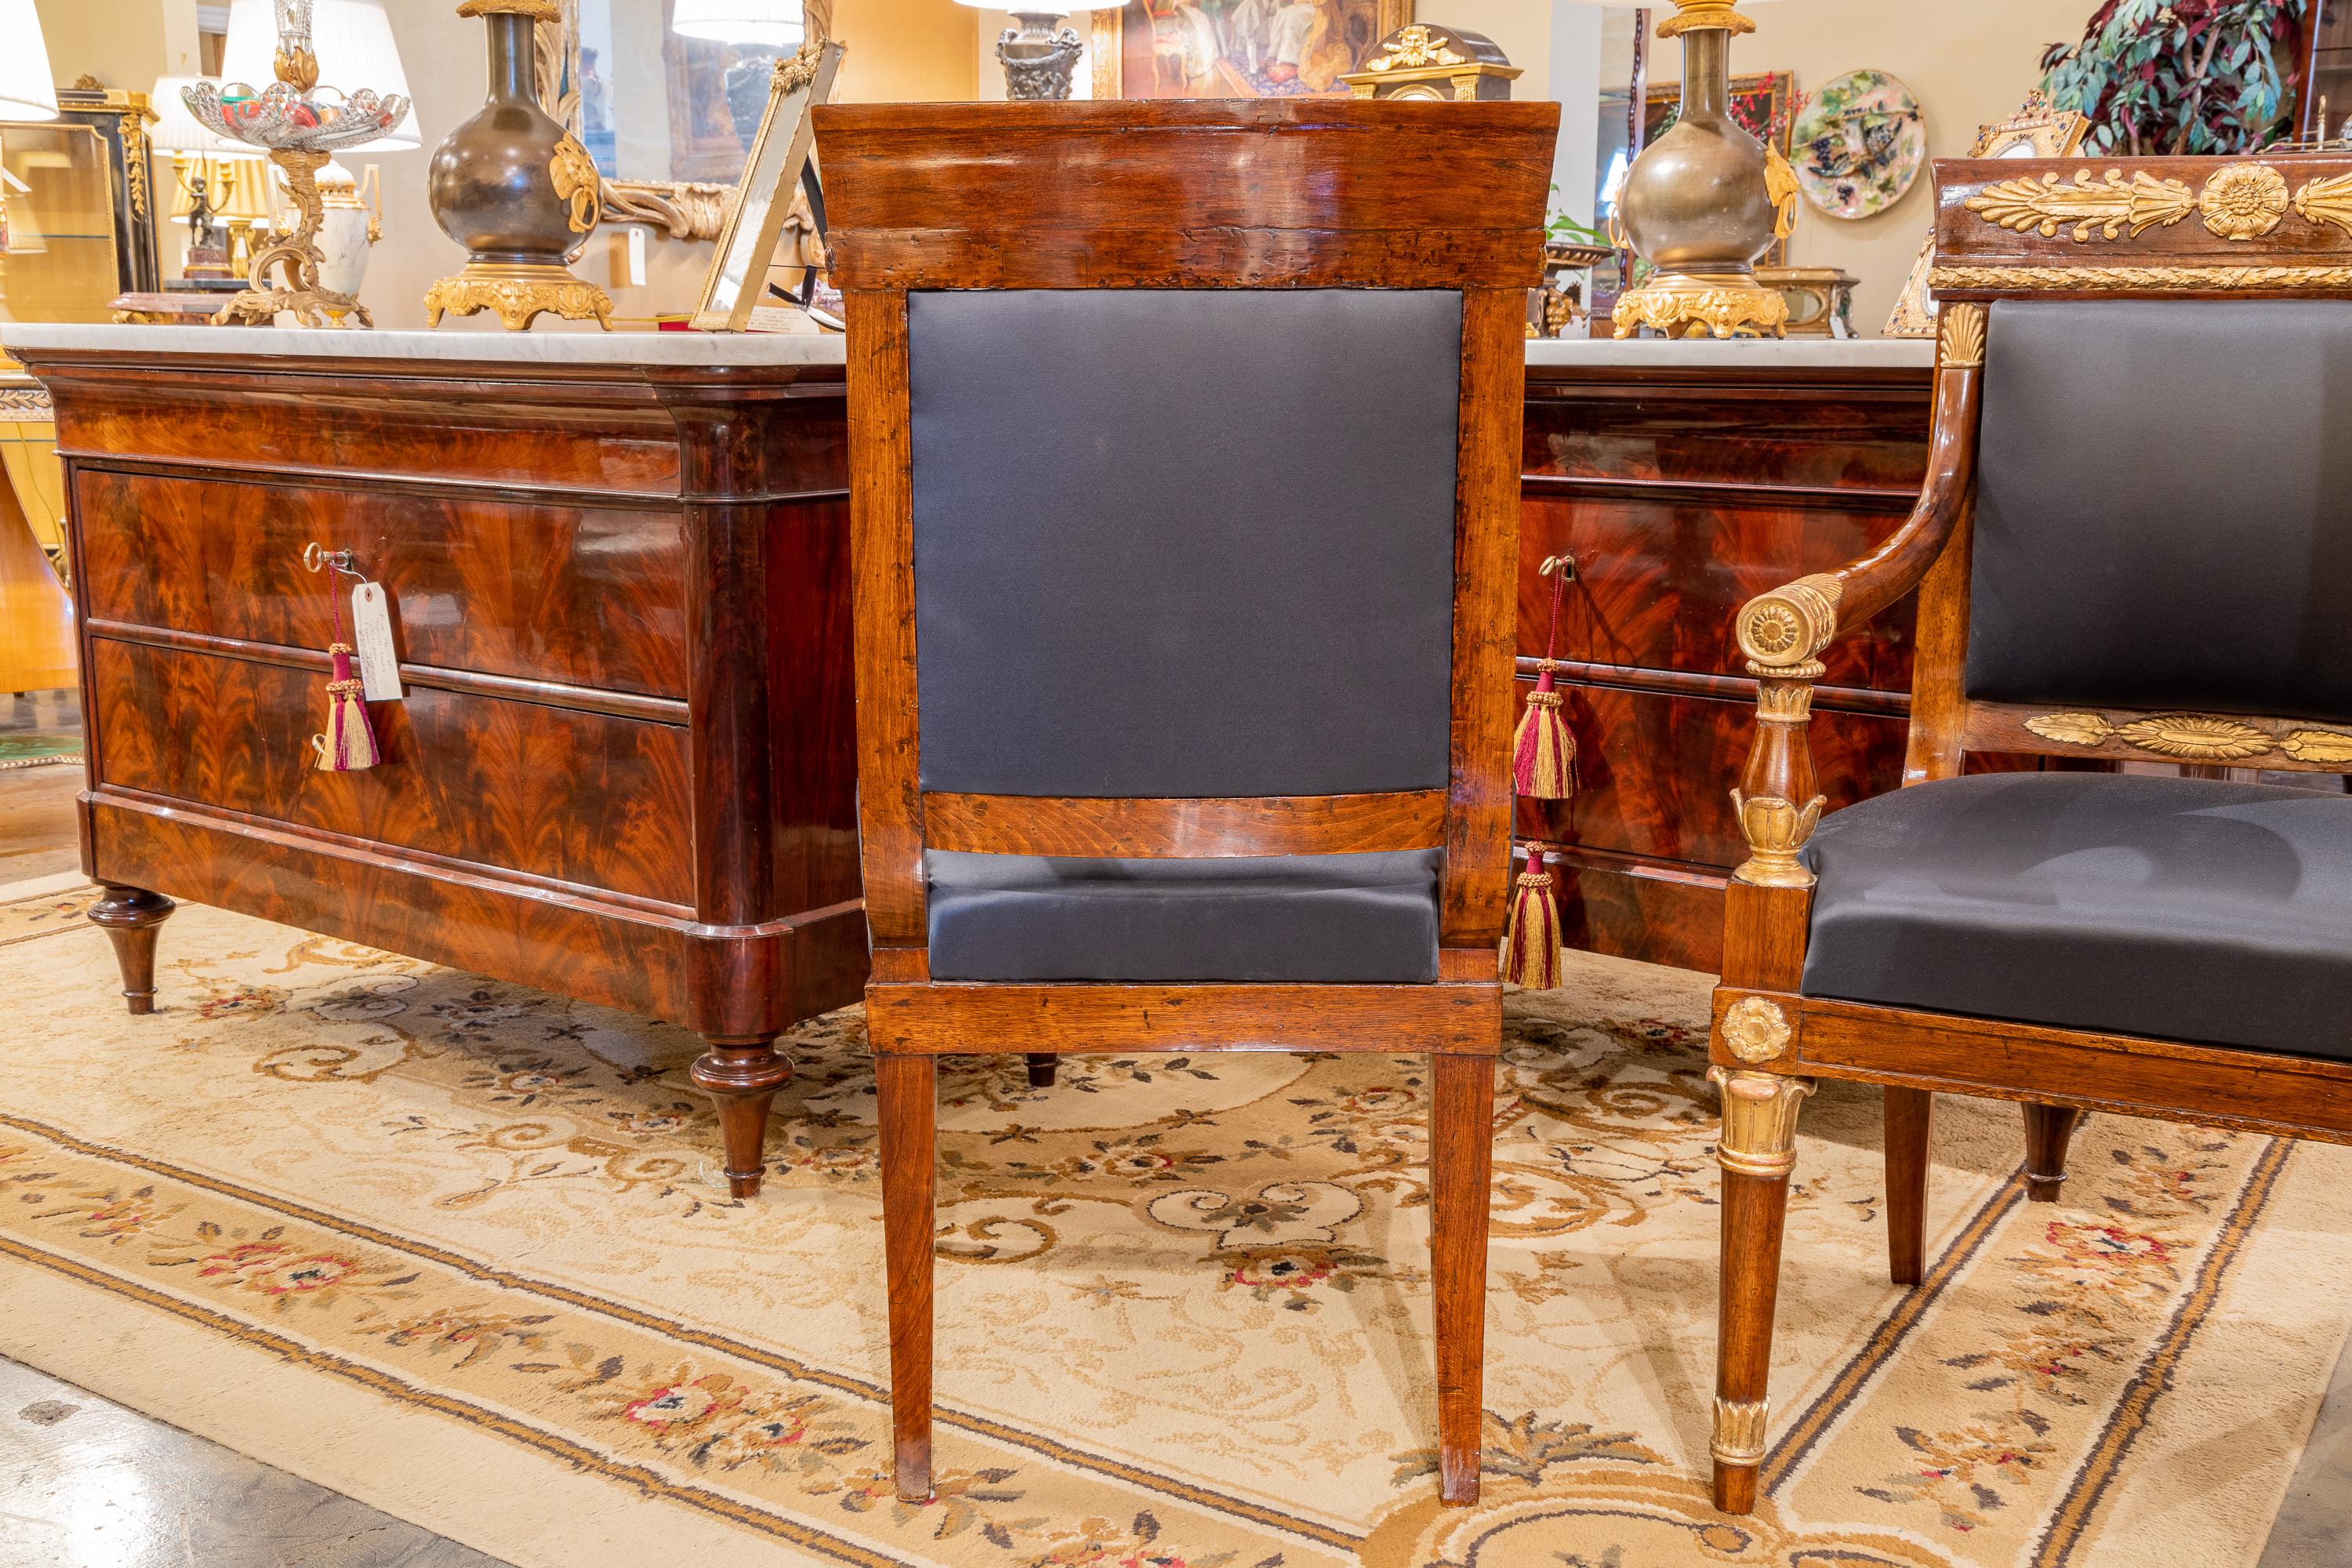 Mahogany Very Fine and Rare Pair of Early 19th C Italian Empire Carved and Gilt Chairs For Sale